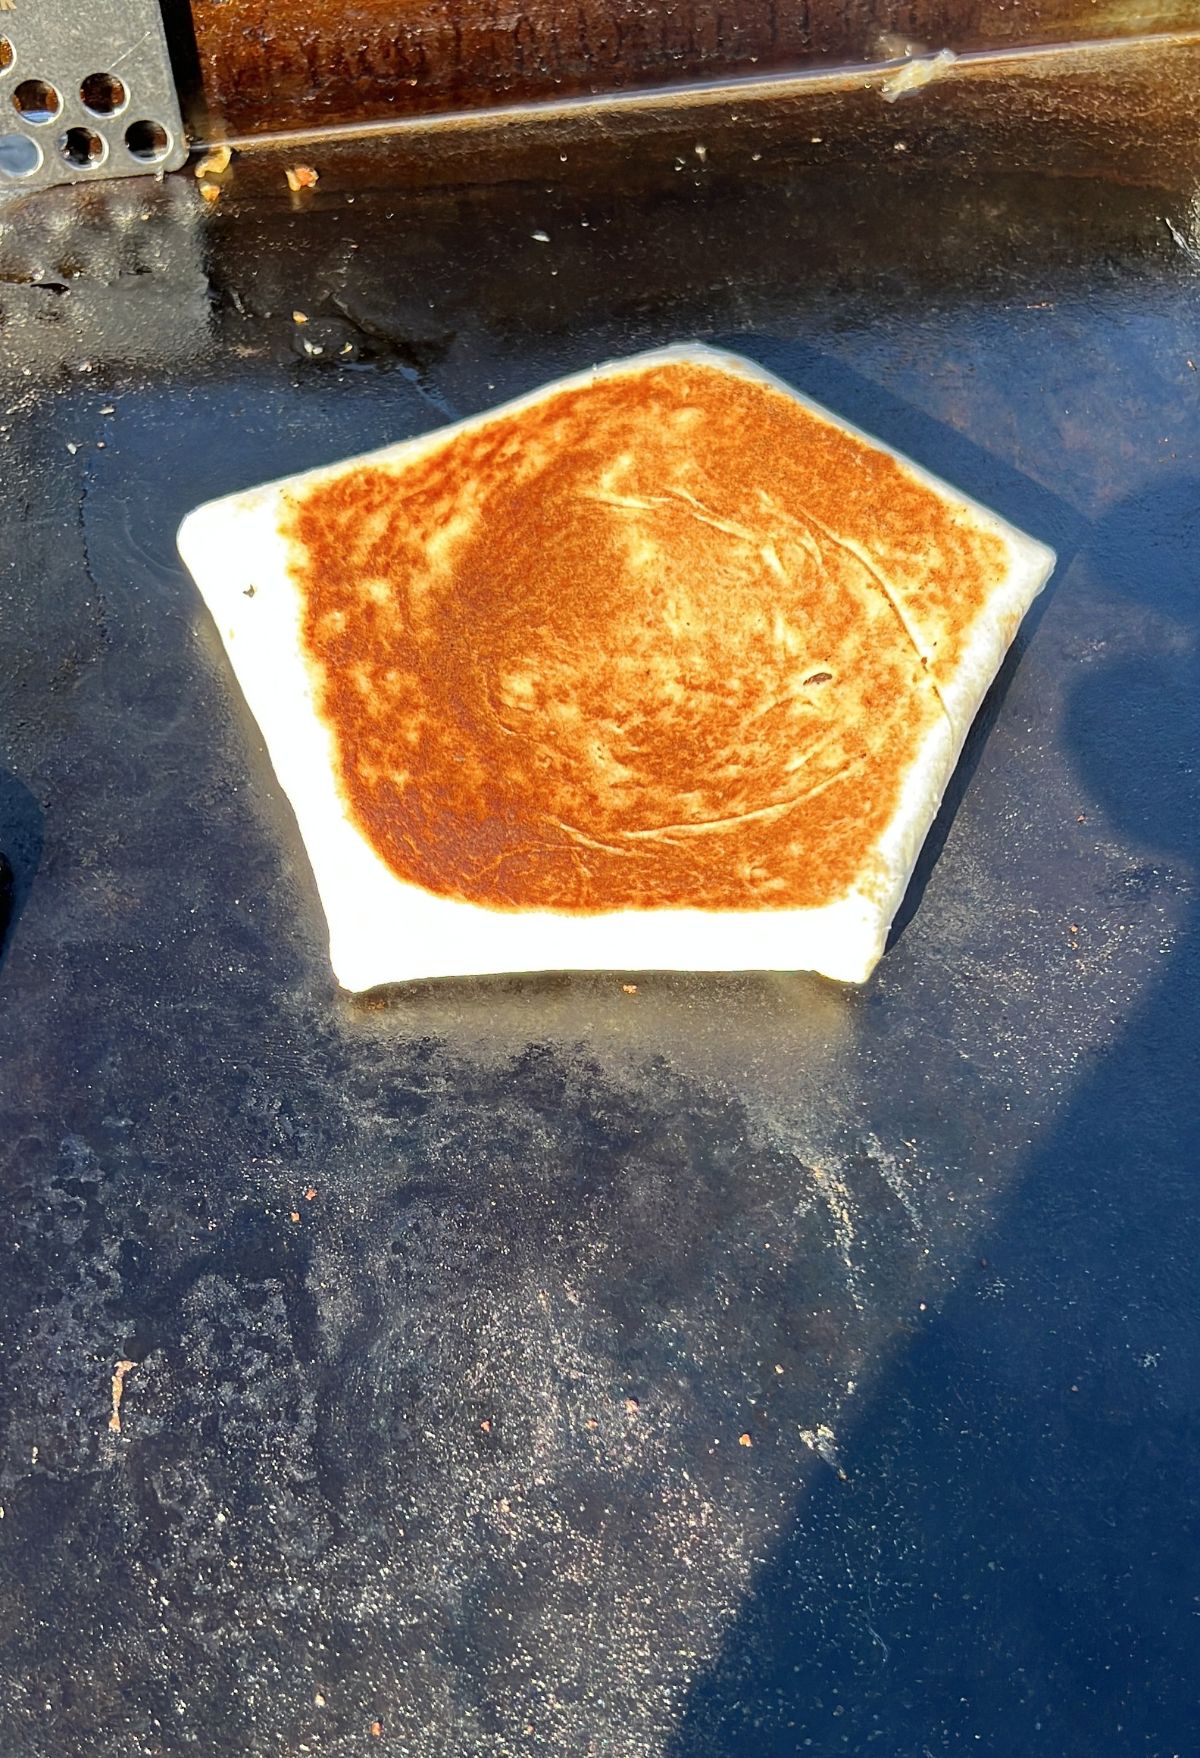 A pentagon-shaped bread toasting on a griddle.